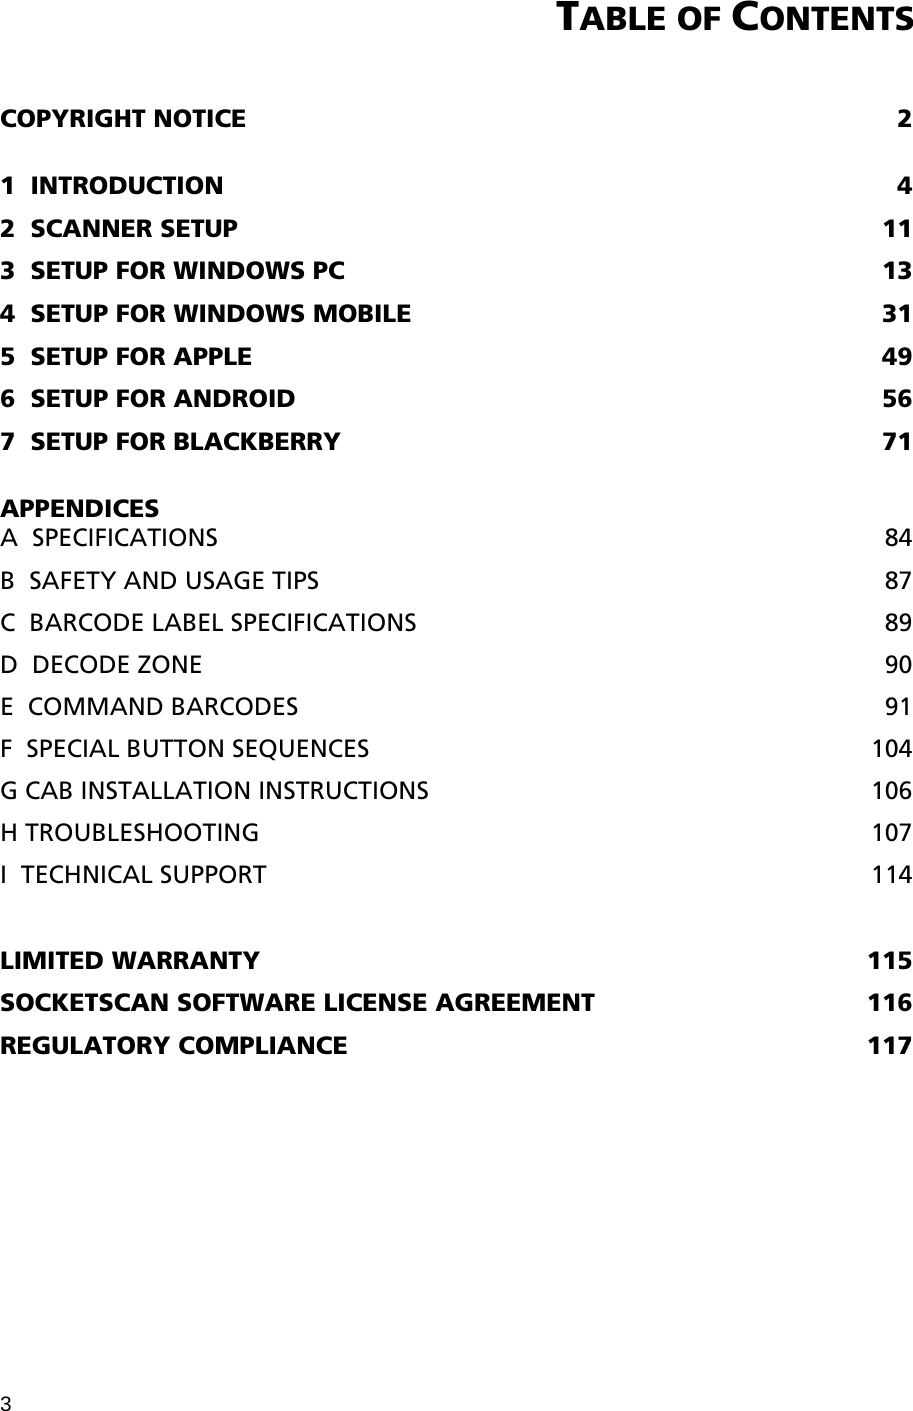 3 TABLE OF CONTENTS   COPYRIGHT NOTICE  2  1  INTRODUCTION  4 2  SCANNER SETUP  11 3  SETUP FOR WINDOWS PC  13 4  SETUP FOR WINDOWS MOBILE  31 5  SETUP FOR APPLE  49 6  SETUP FOR ANDROID  56 7  SETUP FOR BLACKBERRY  71  APPENDICES A  SPECIFICATIONS  84 B  SAFETY AND USAGE TIPS  87 C  BARCODE LABEL SPECIFICATIONS  89 D  DECODE ZONE  90 E  COMMAND BARCODES  91 F  SPECIAL BUTTON SEQUENCES  104 G CAB INSTALLATION INSTRUCTIONS  106 H TROUBLESHOOTING  107 I  TECHNICAL SUPPORT  114  LIMITED WARRANTY  115 SOCKETSCAN SOFTWARE LICENSE AGREEMENT  116 REGULATORY COMPLIANCE  117 